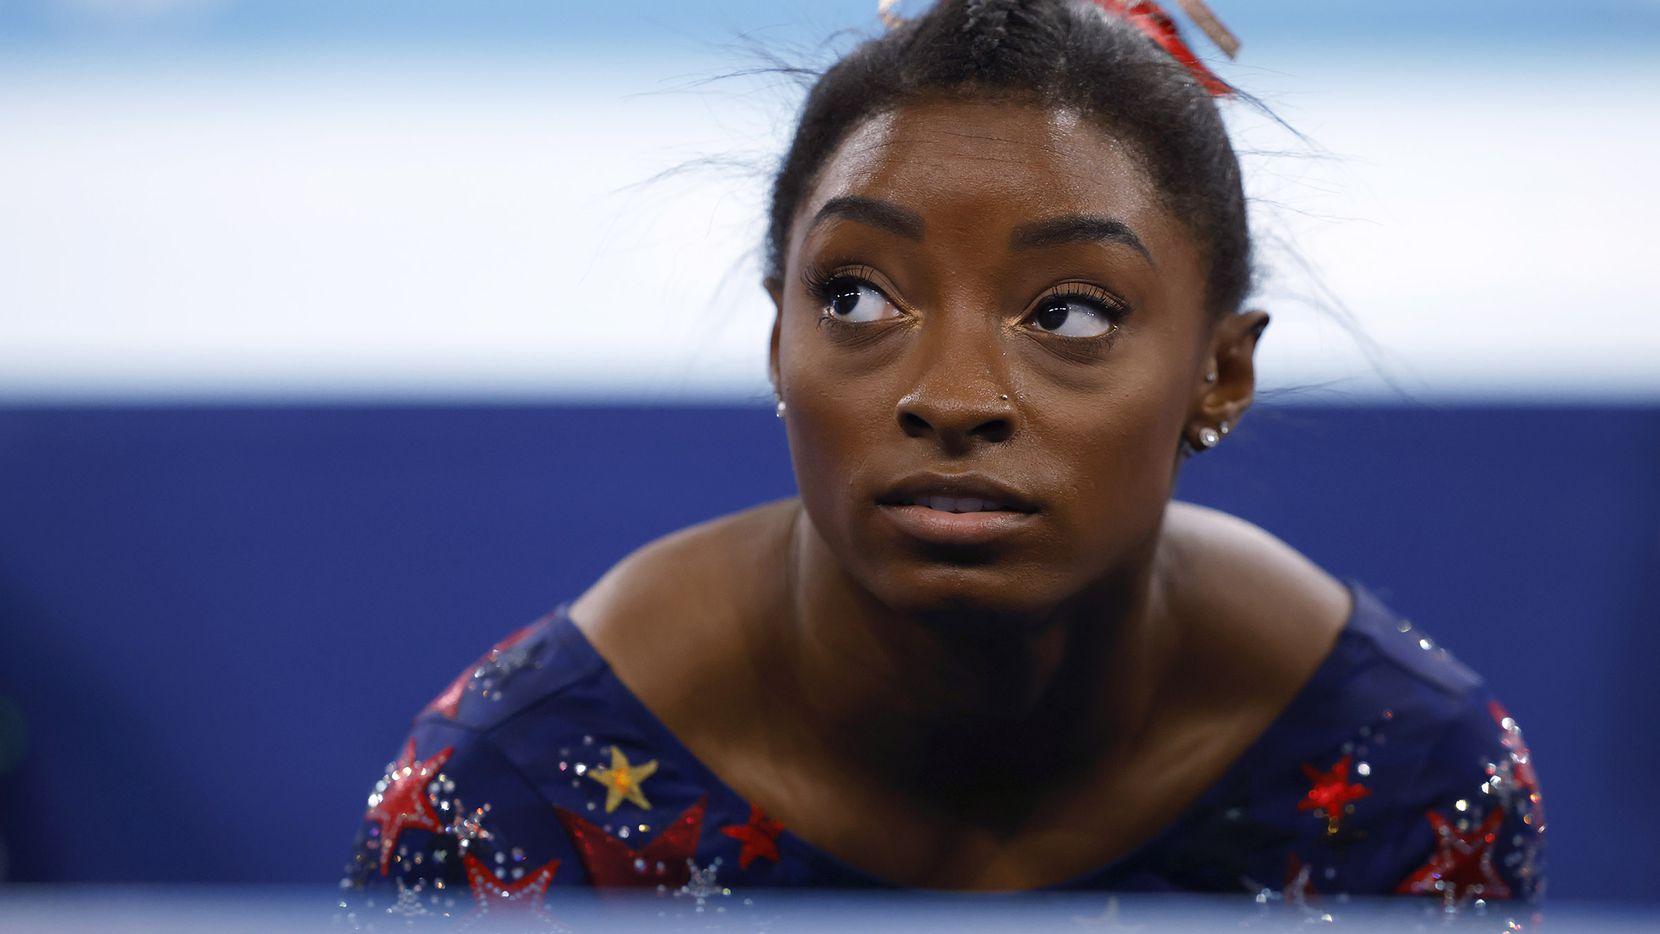 Threatened For Gold Simone Biles U S Gymnastics Open Olympics With Upset Results In Qualifier